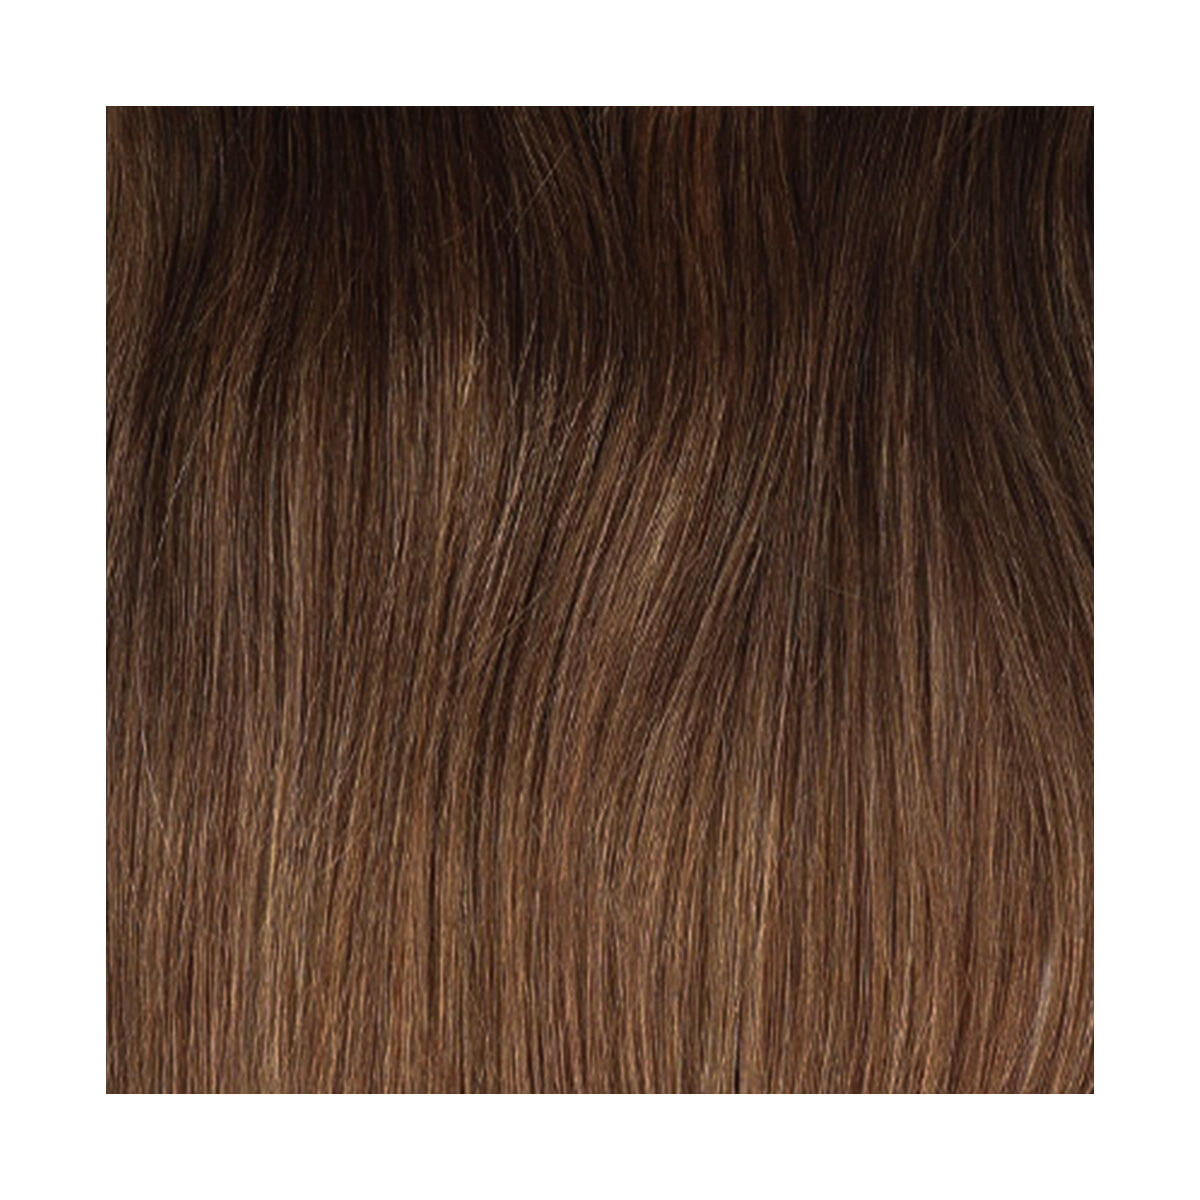 Colour Sample R2.3/5.0 Chocolate Brown Root 20 cm